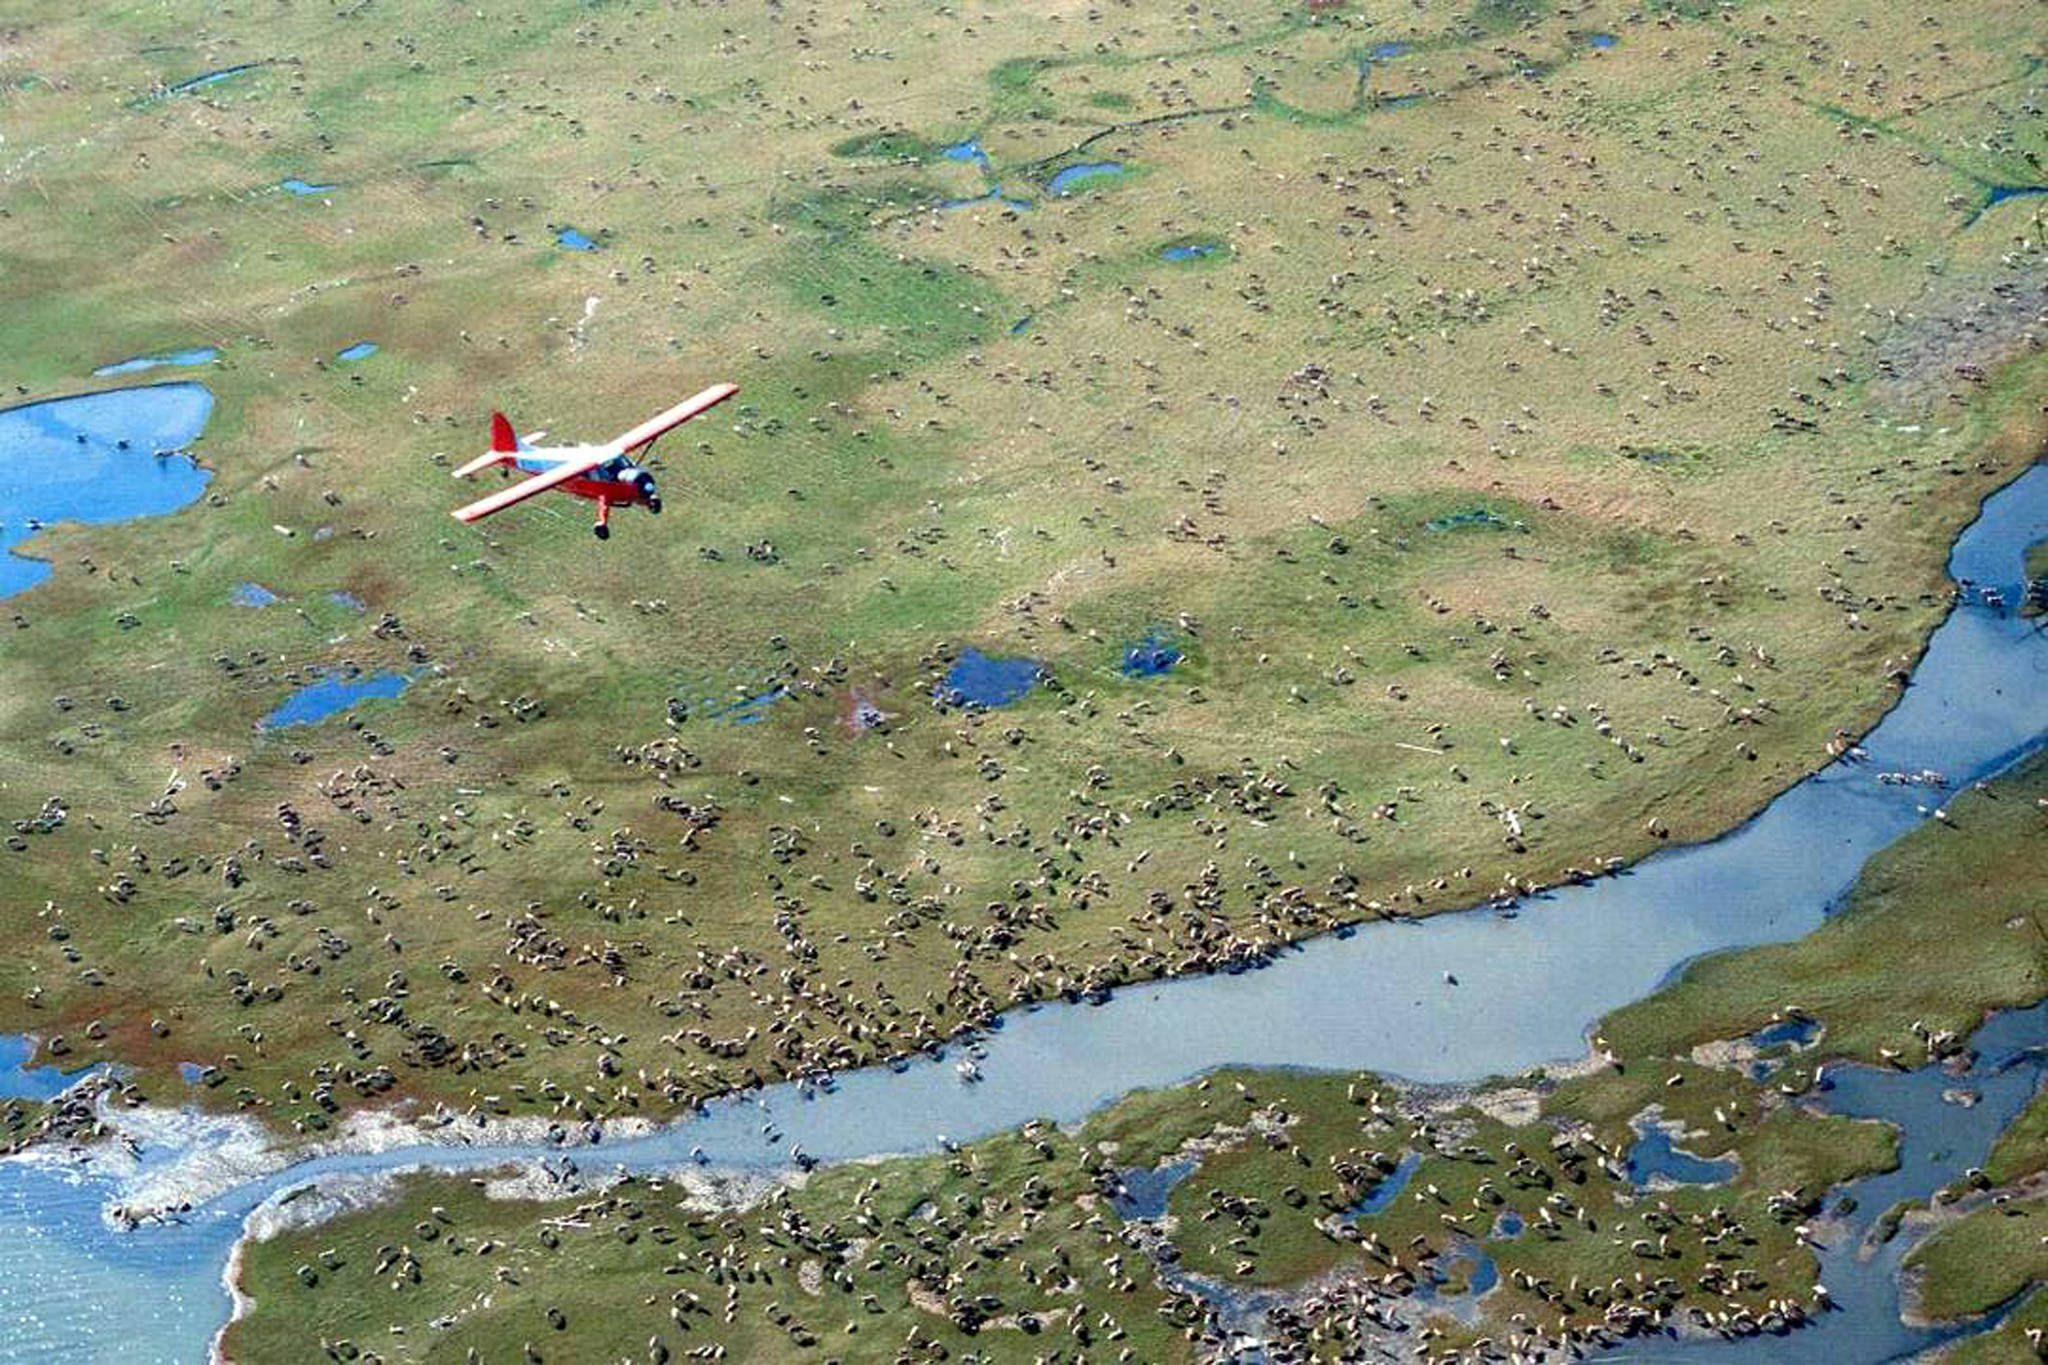 In this undated photo provided by the U.S. Fish and Wildlife Service, an airplane flies over caribou from the Porcupine Caribou Herd on the coastal plain of the Arctic National Wildlife Refuge in northeast Alaska.The Department of the Interior has approved an oil and gas leasing program within Alaska’s Arctic National Wildlife Refuge. The refuge is home to polar bears, caribou and other wildlife. Secretary of the Interior David Bernhardt signed the Record of Decision, which will determine where oil and gas leasing will take place in the refuge’s coastal plain. (U.S. Fish and Wildlife Service via AP)